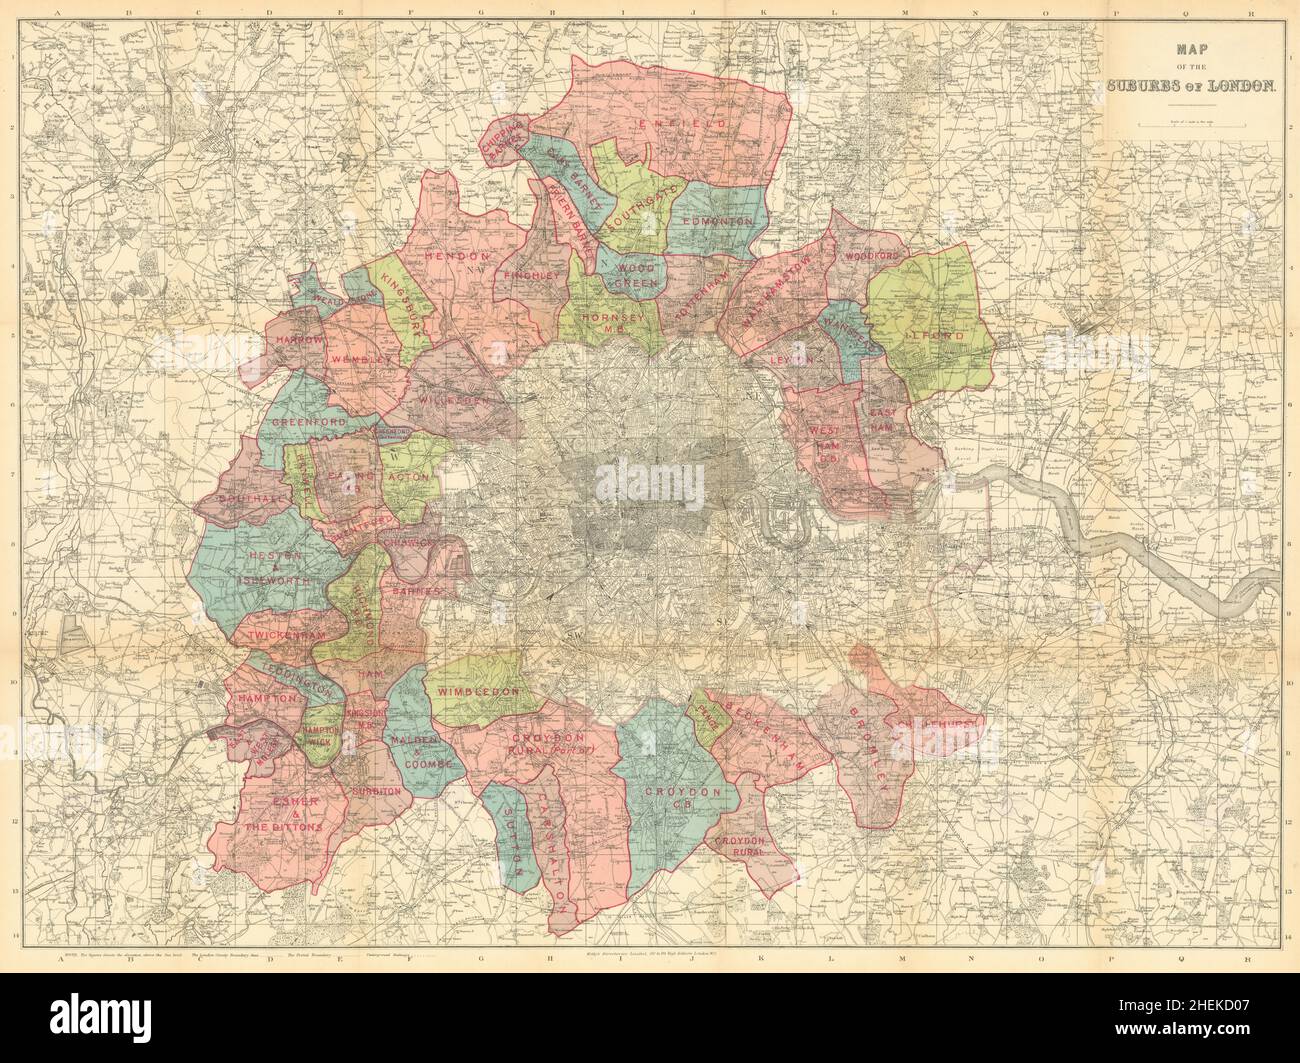 Map of the Suburbs of London. 56x74cm. Kelly's Directories 1904 old Stock Photo